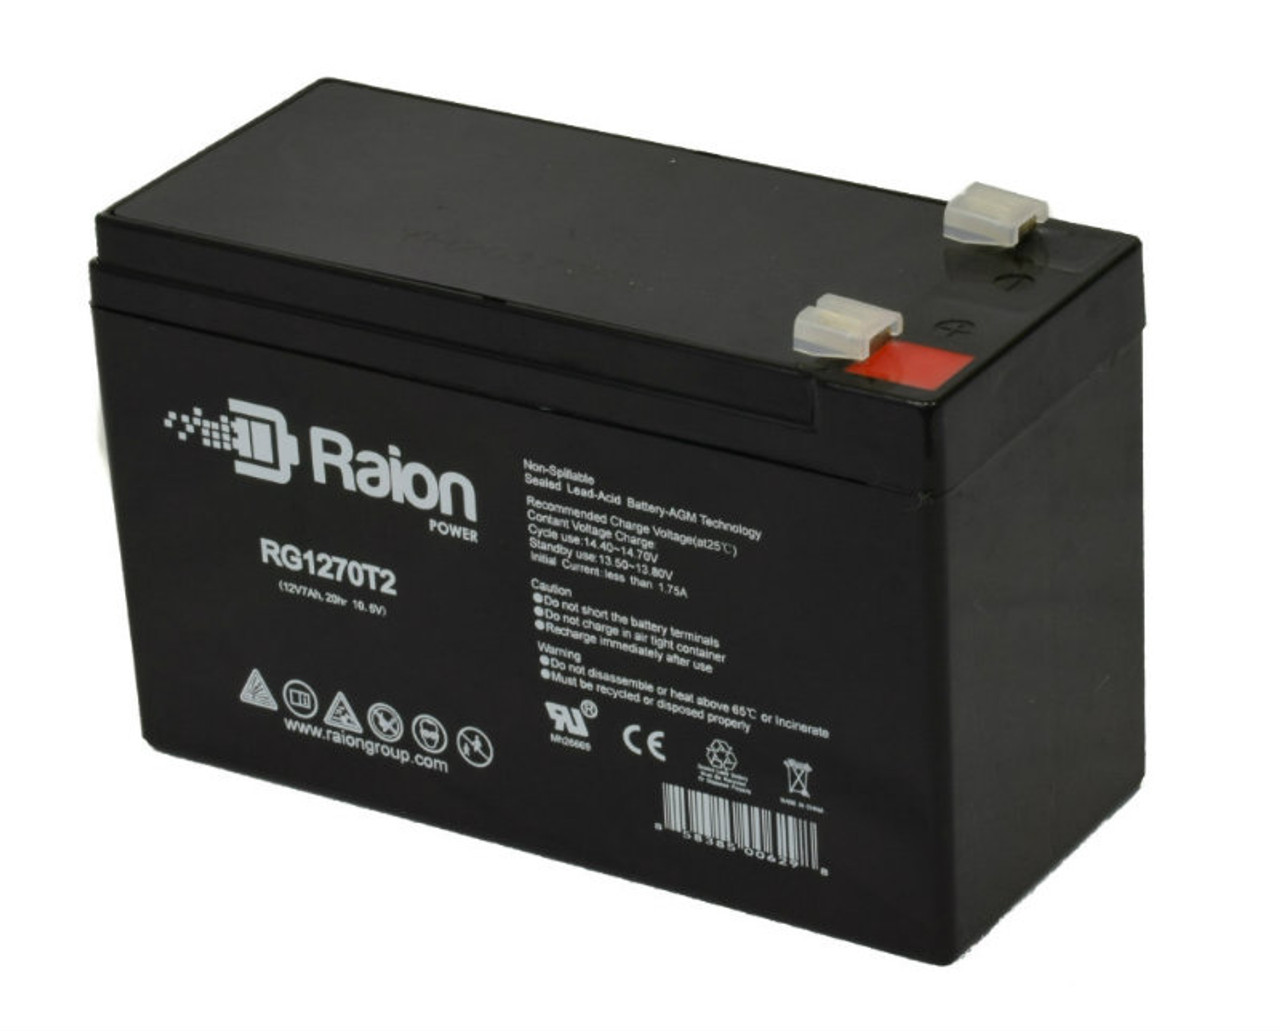 Raion Power Replacement 12V 7Ah Battery for Newmox FNC-1270-F2 - 1 Pack